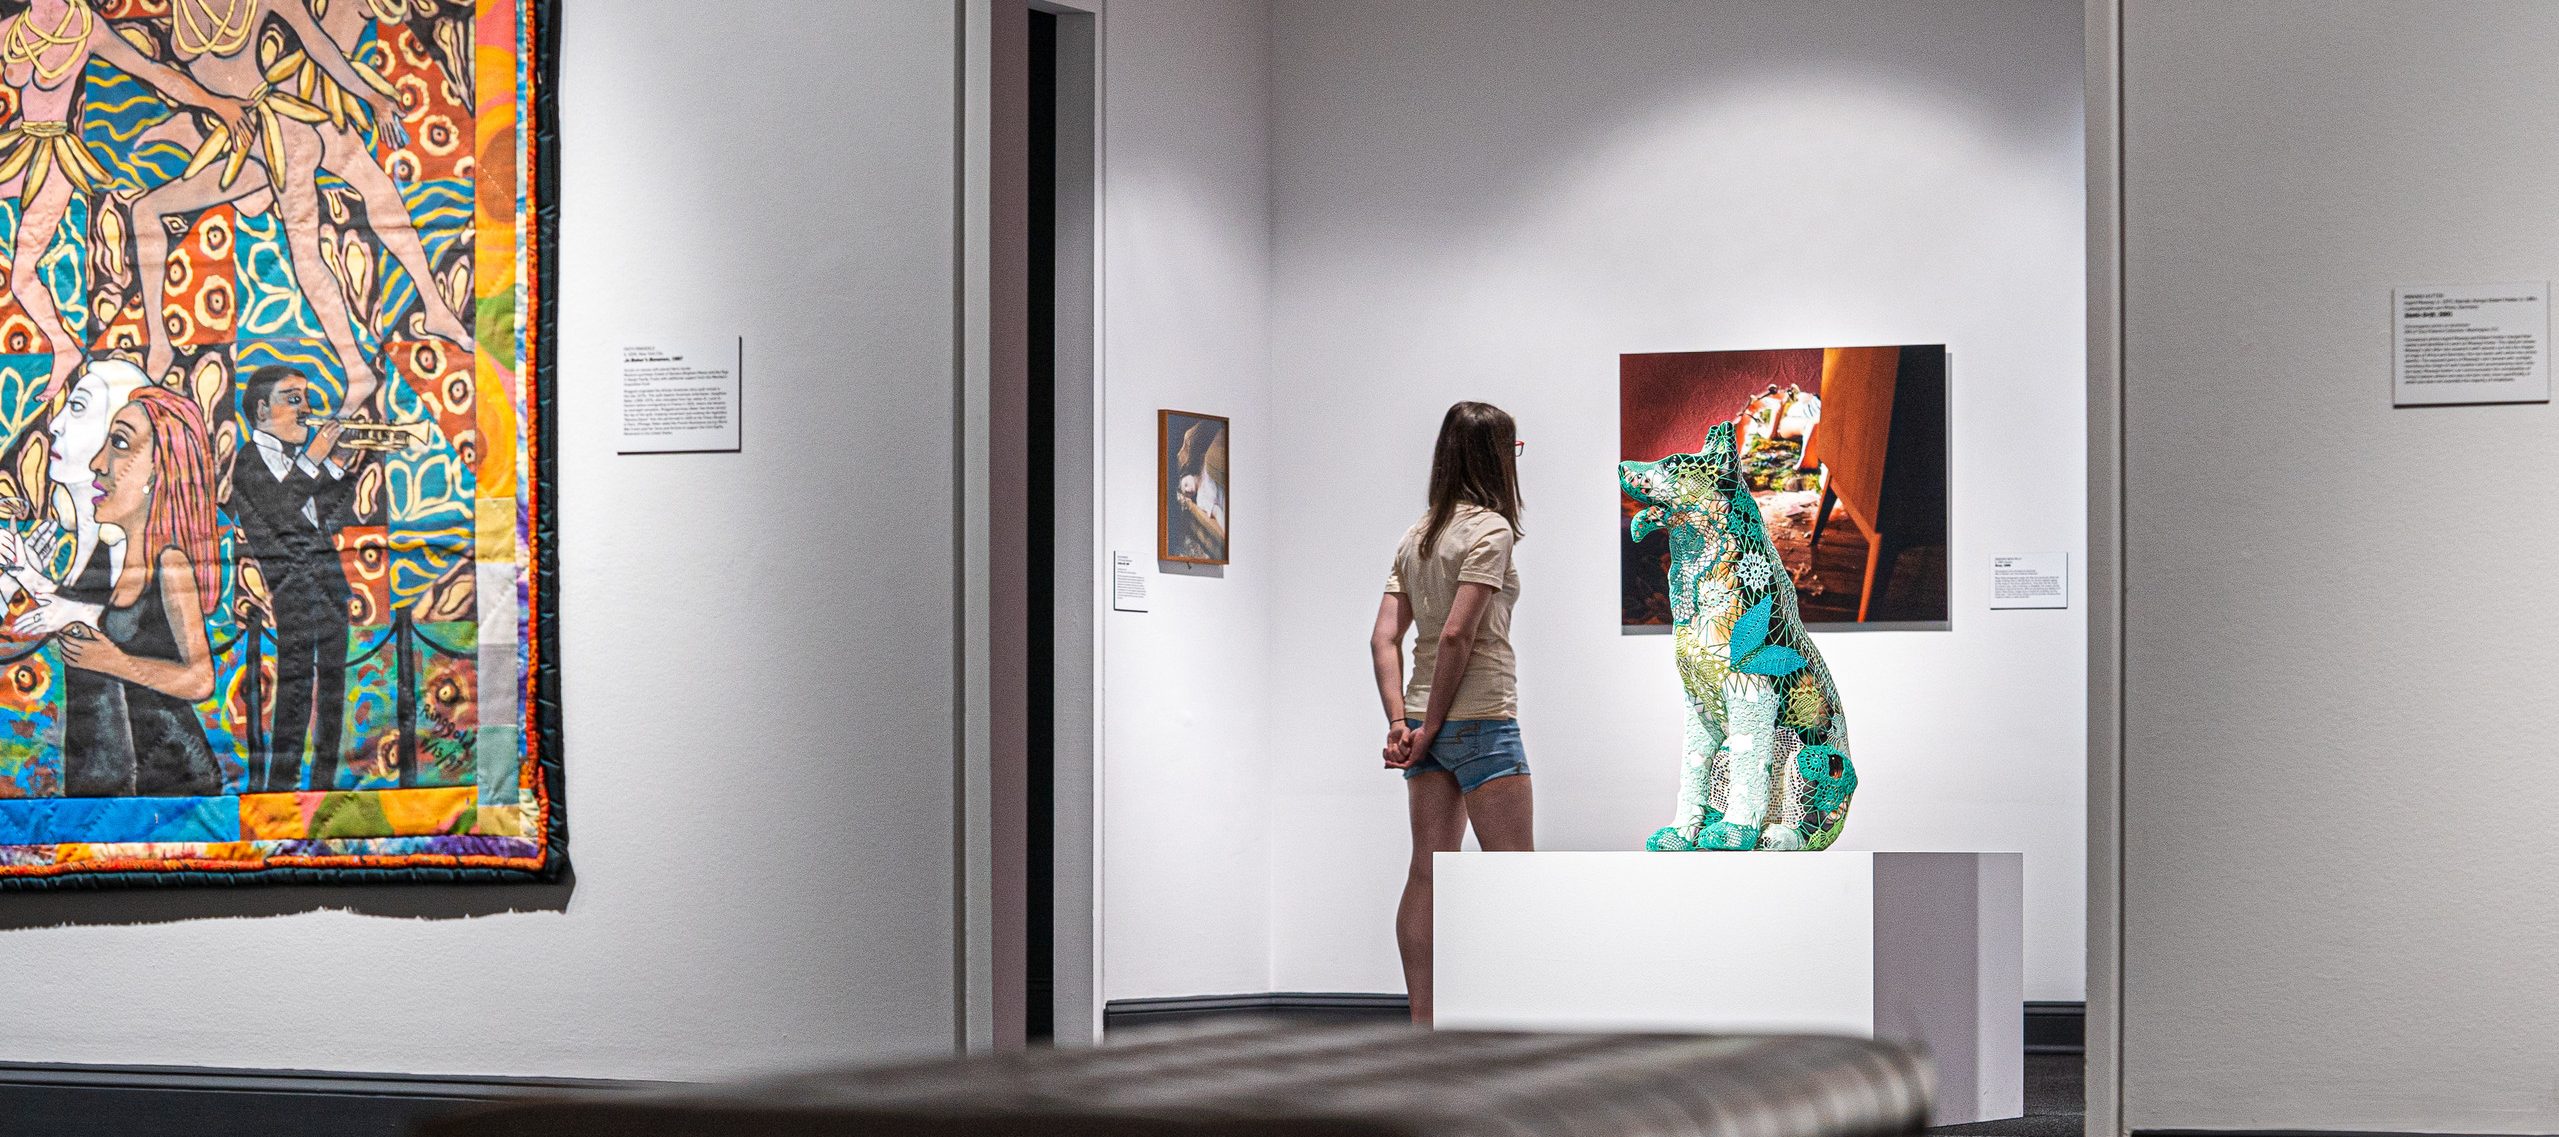 A young woman with light skin walks through the galleries with her hands clasped behind her back.